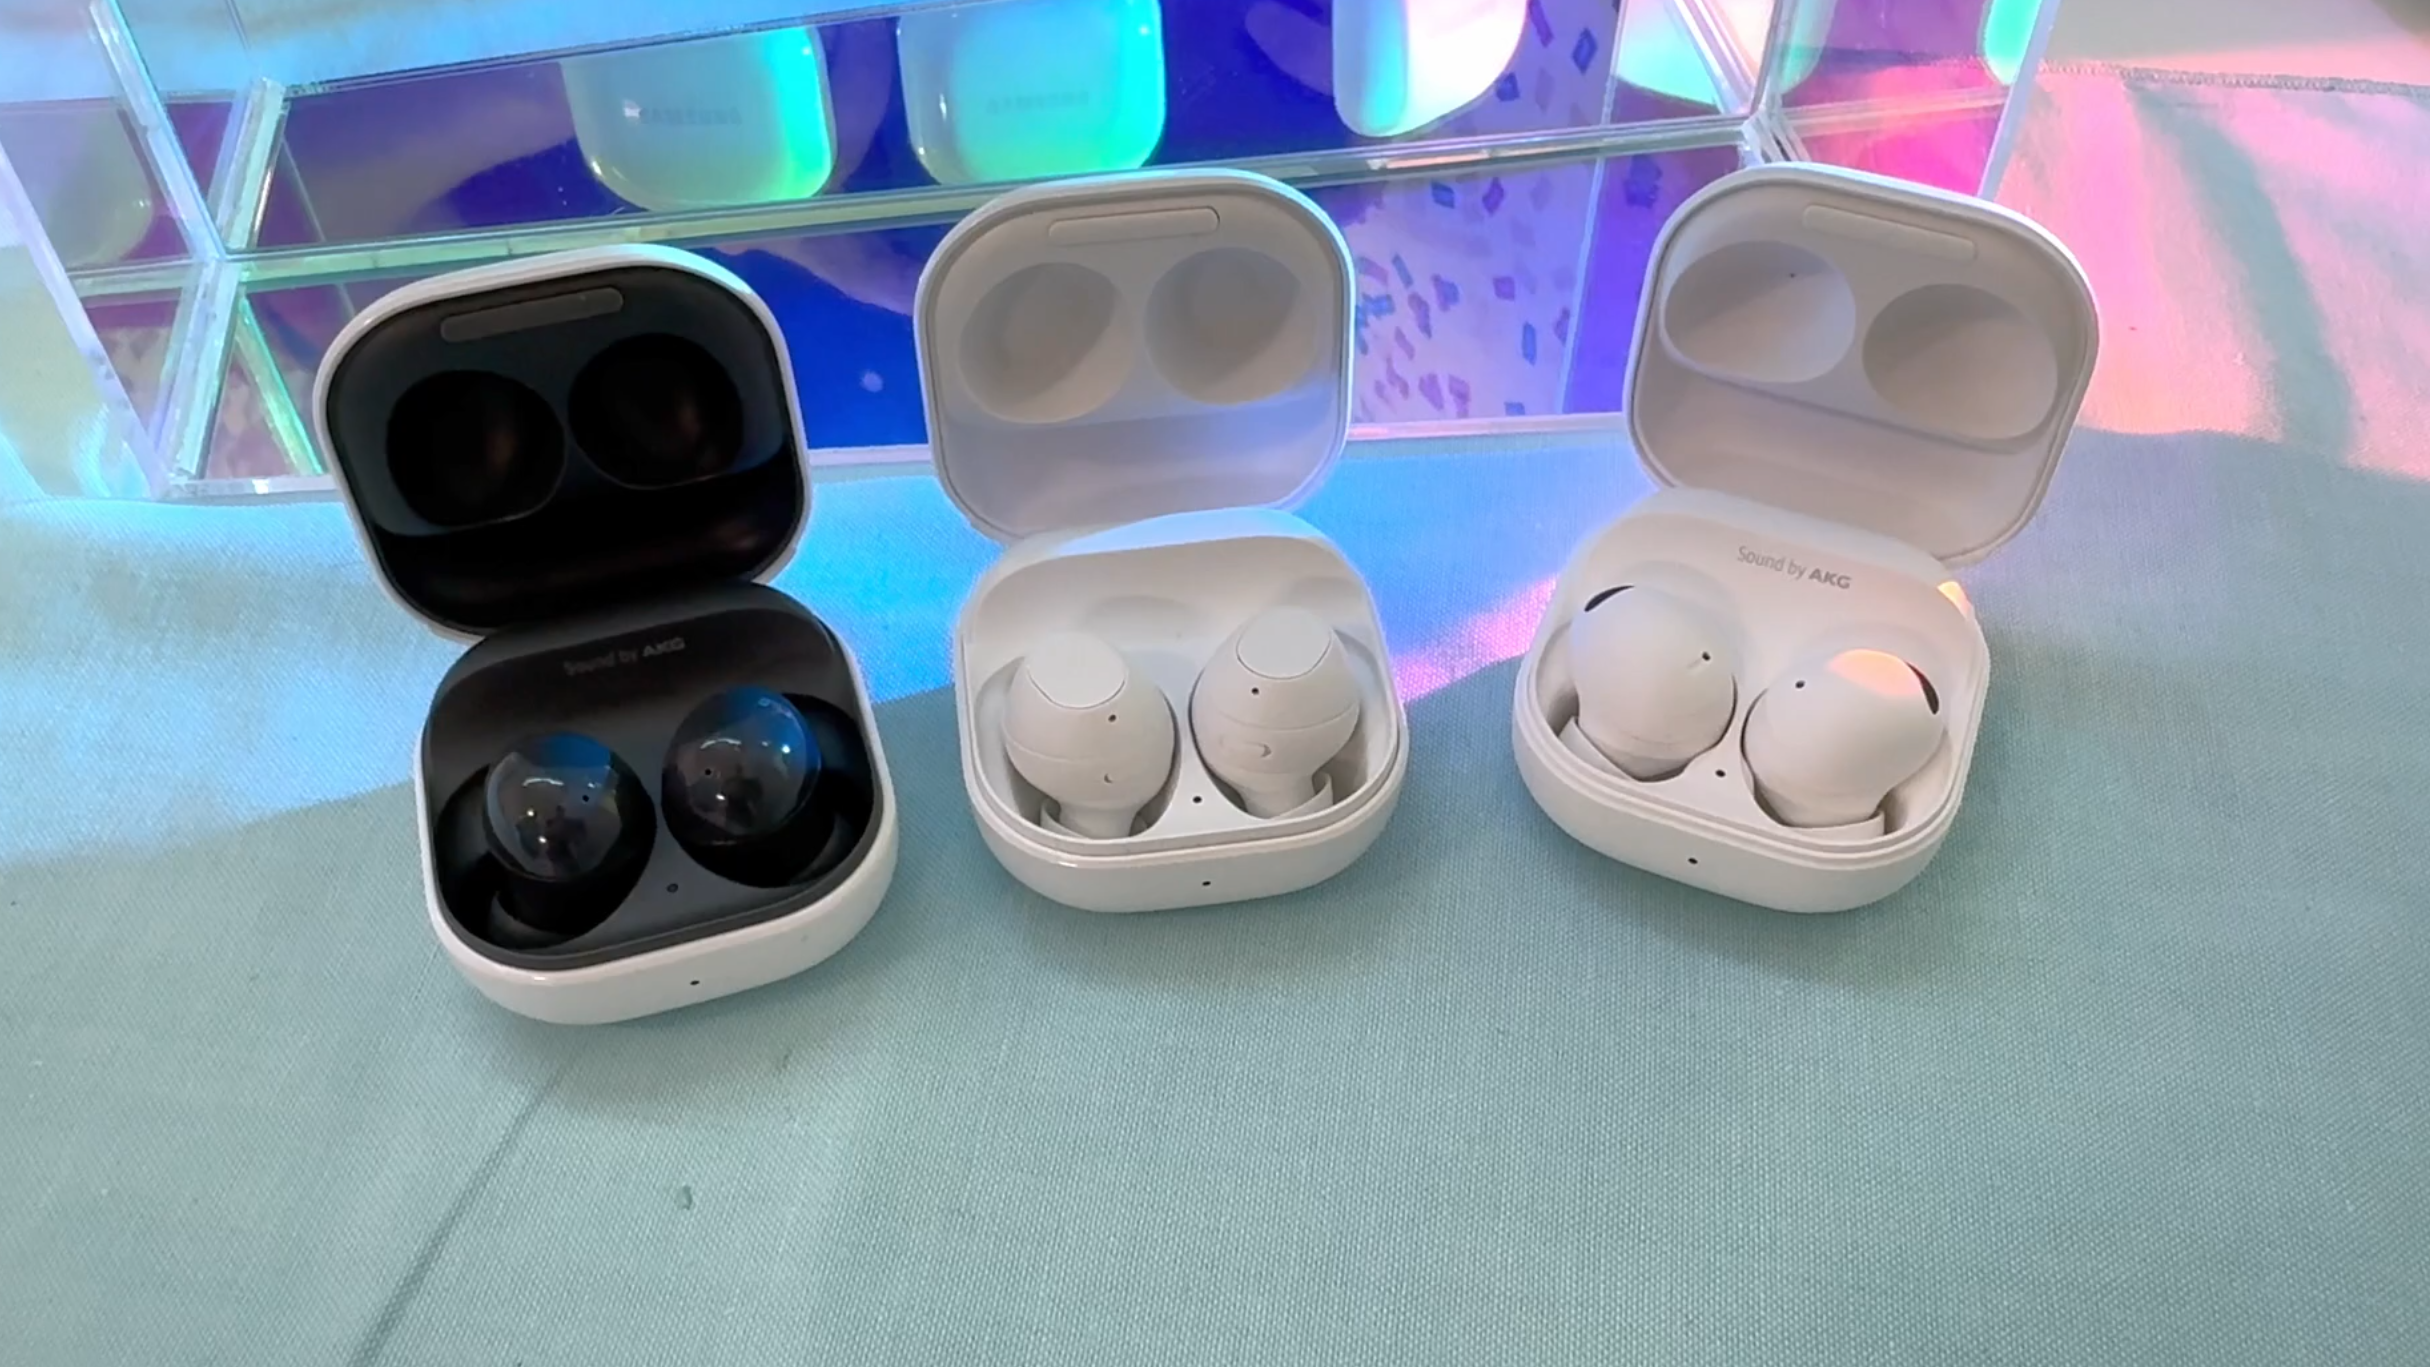 Samsung Galaxy Buds FE: When Fit Makes All the Difference